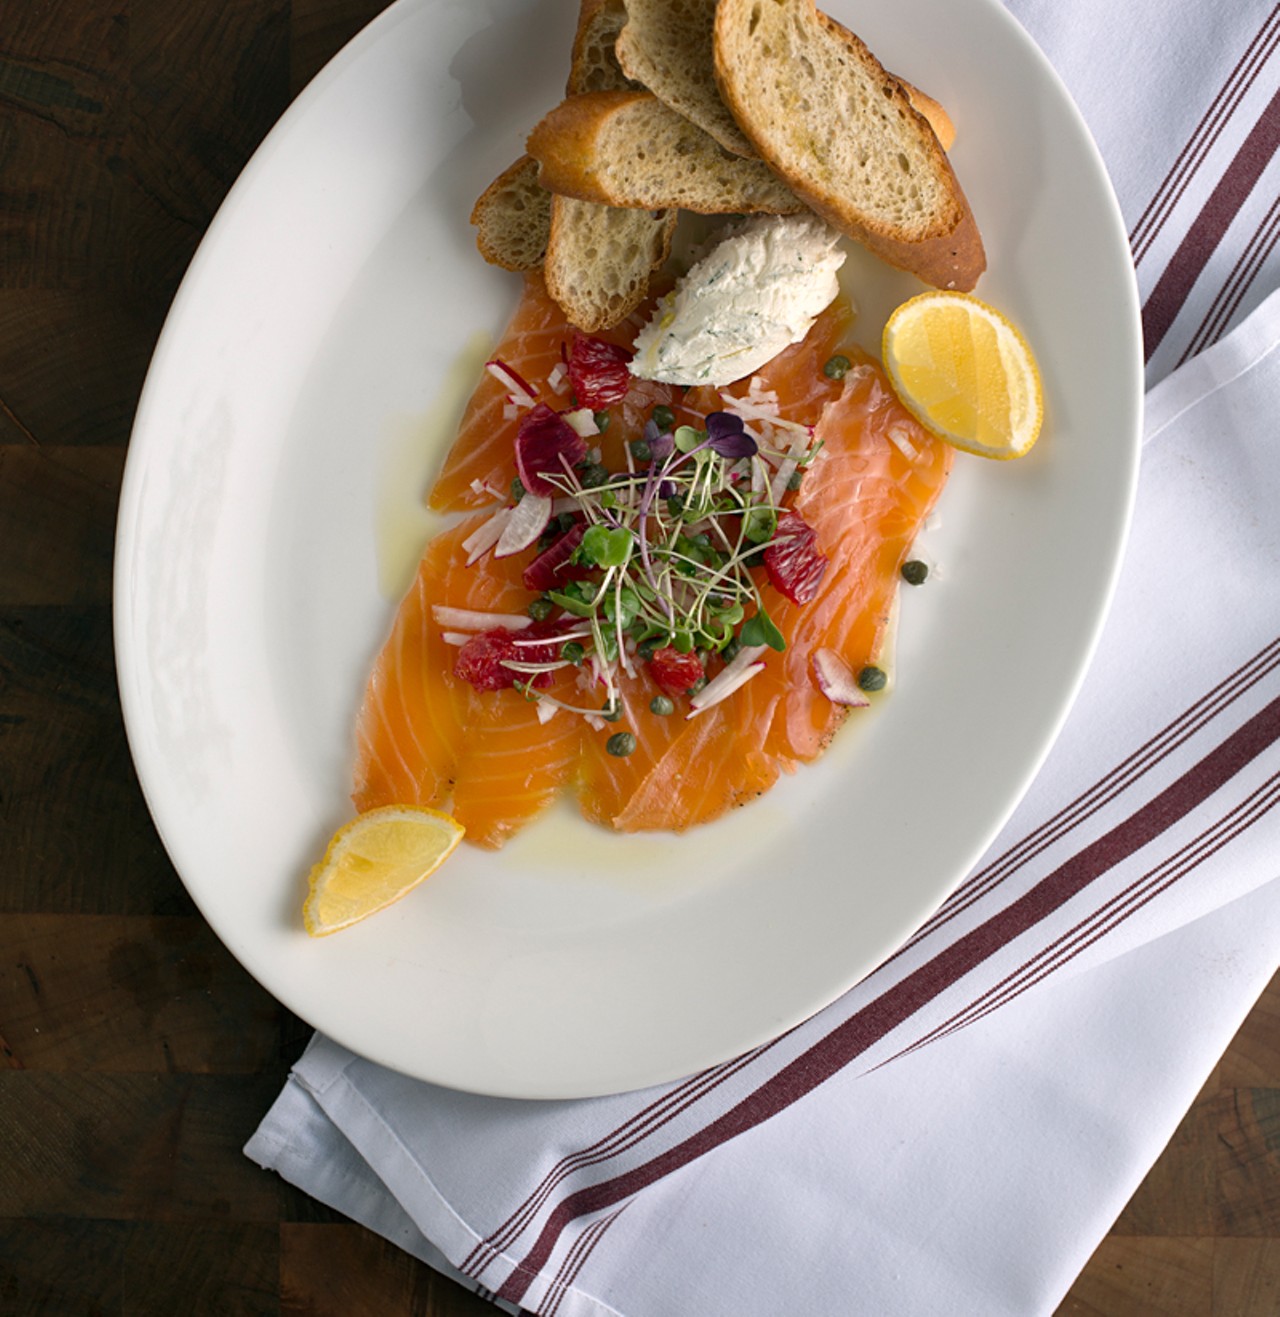 House-smoked Salmon with dill-citrus mascarpone, capers, crostini.